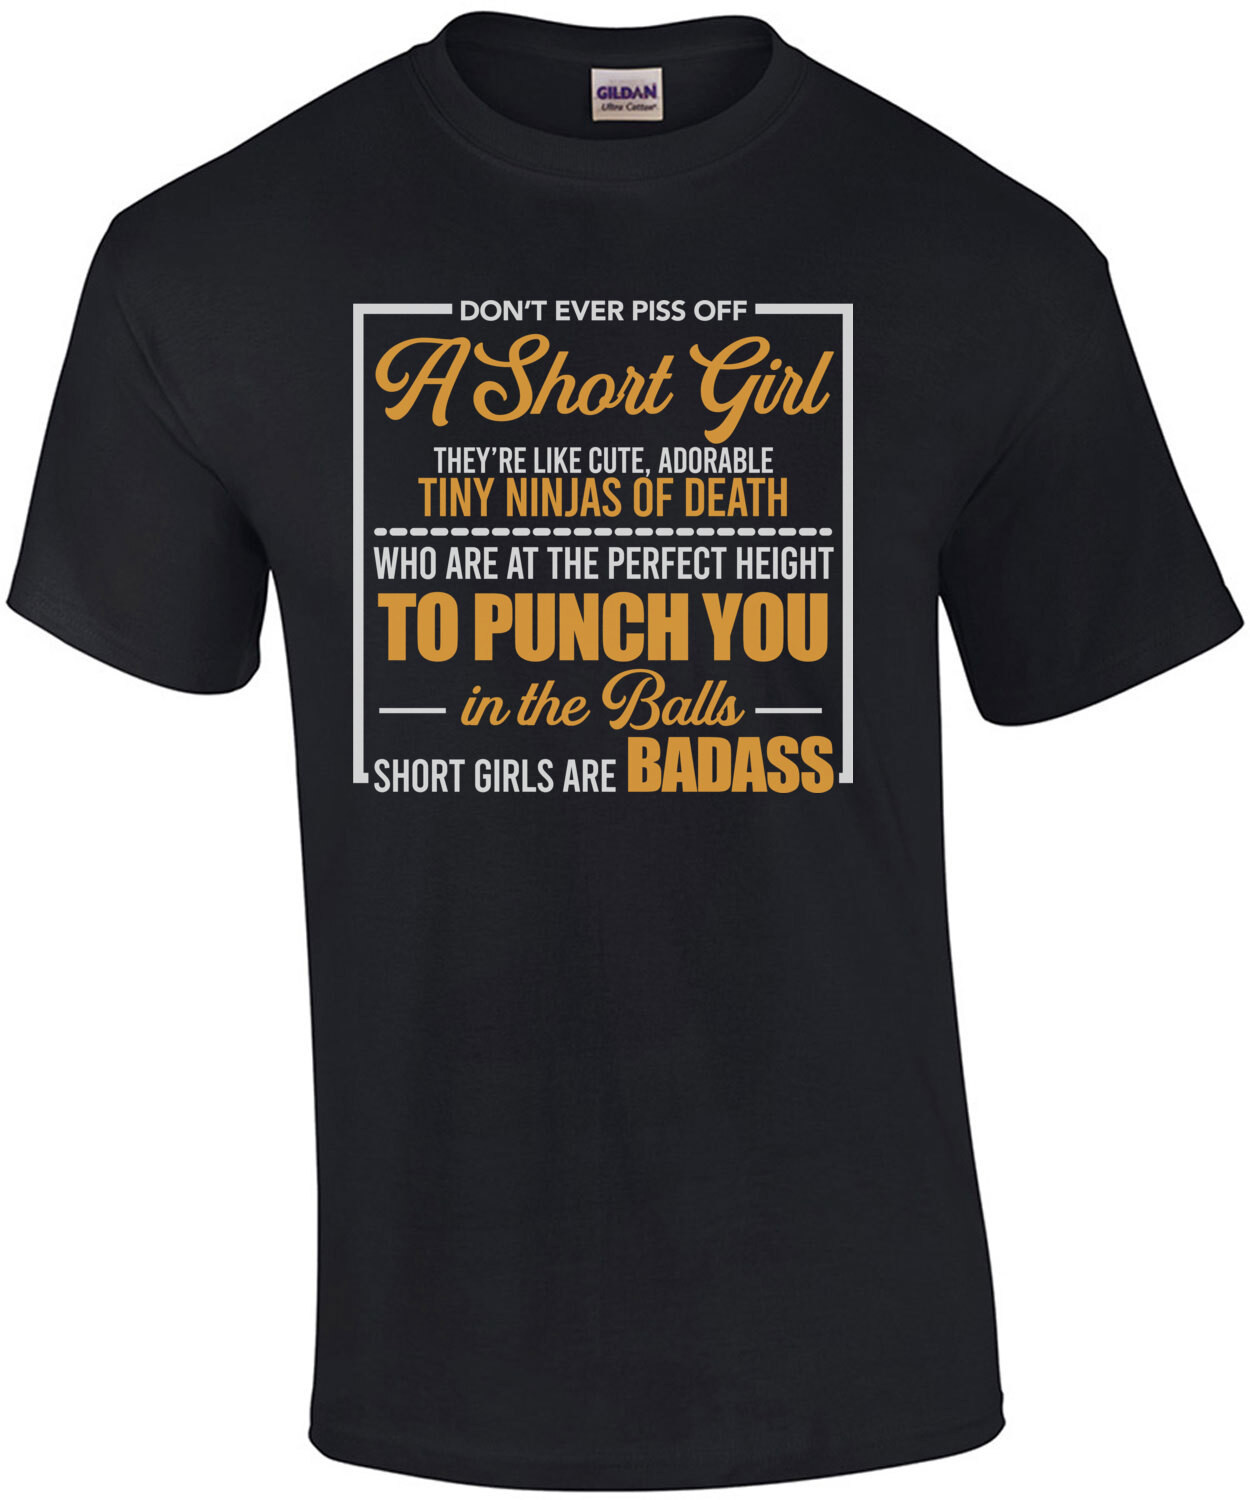 Don't ever piss off a short girl. They're like cute, adorable tiny ninjas of death who are at the perfect height to punch you in the balls - short girls are badass - funny ladies t-shirt